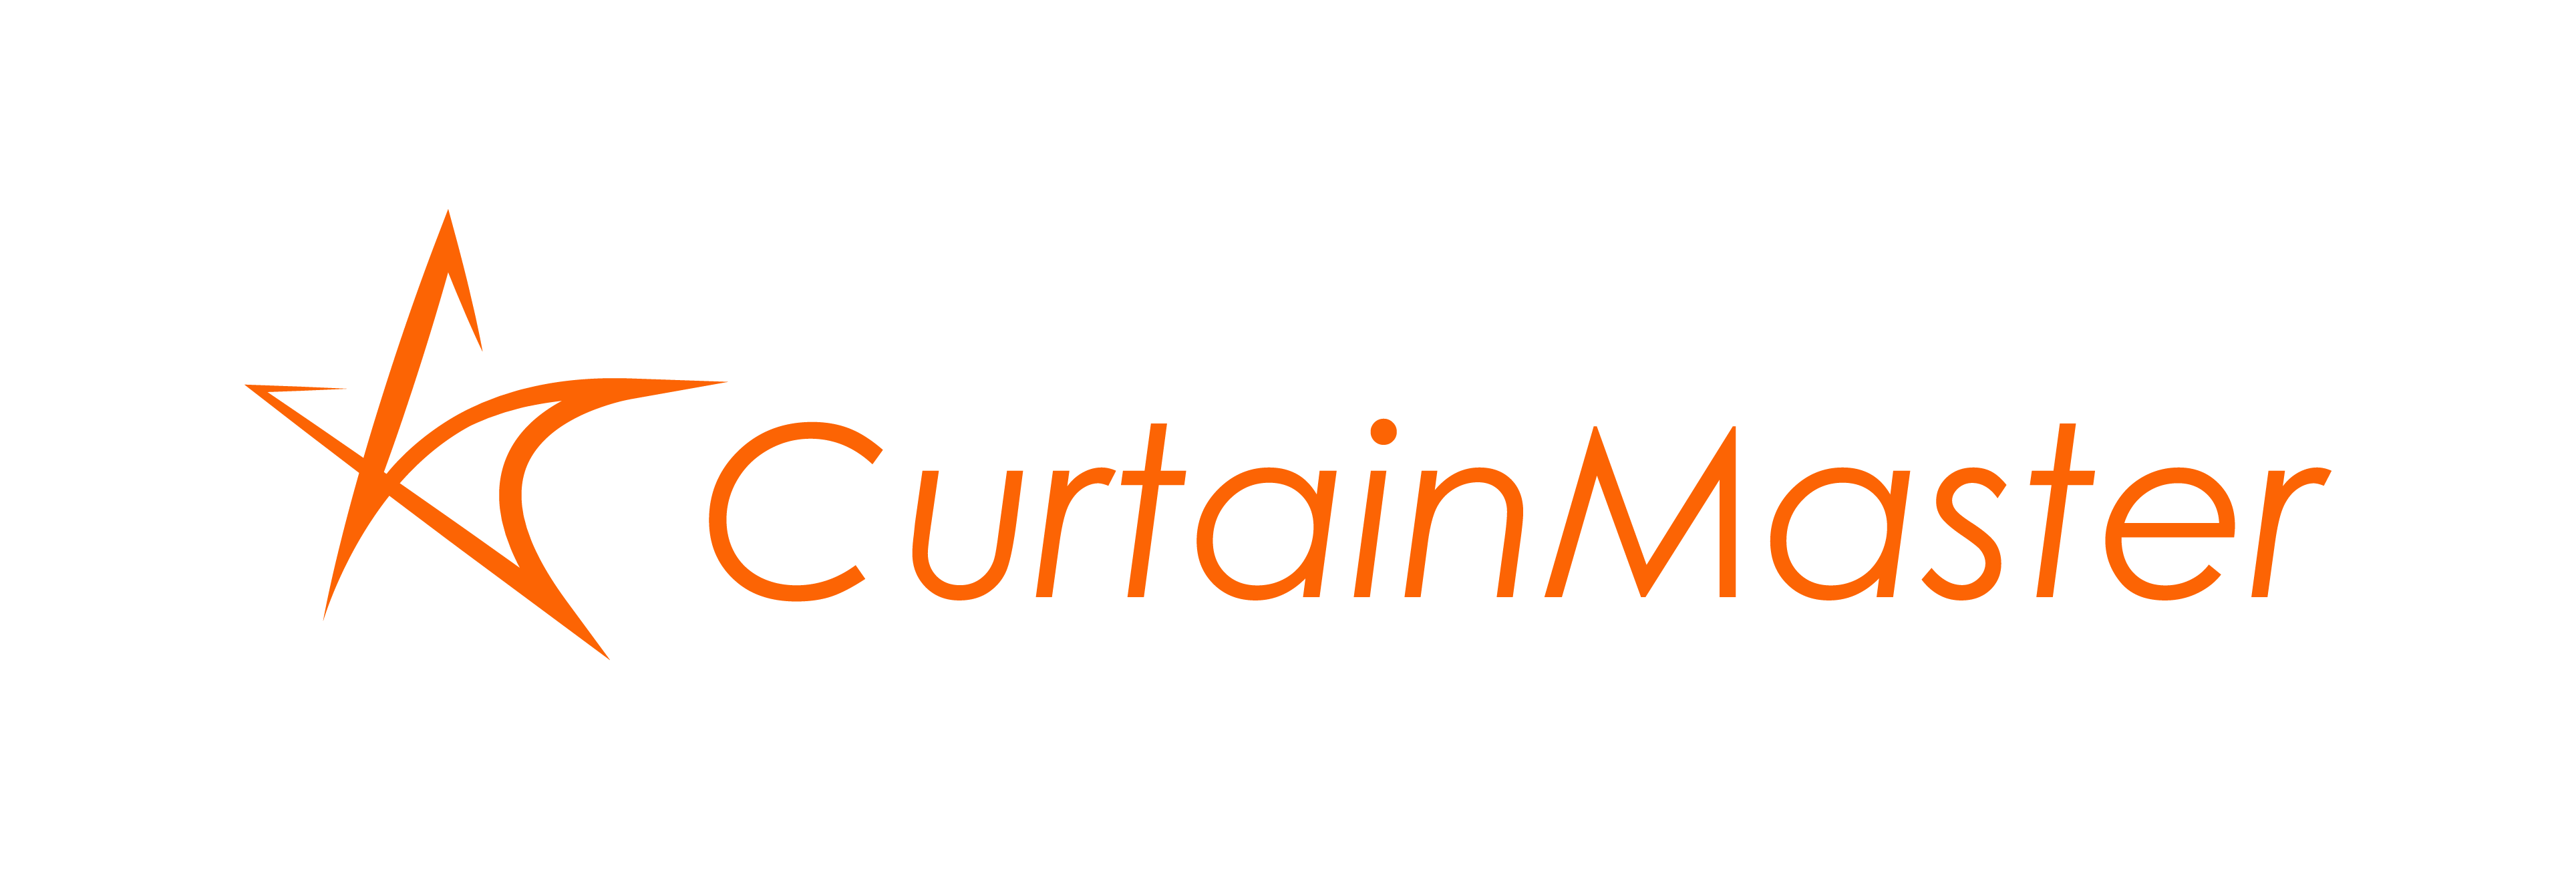 CurtainMaster – Reducing Hospital Acquired Infections and Increasing Compliance…One Curtain at a Time